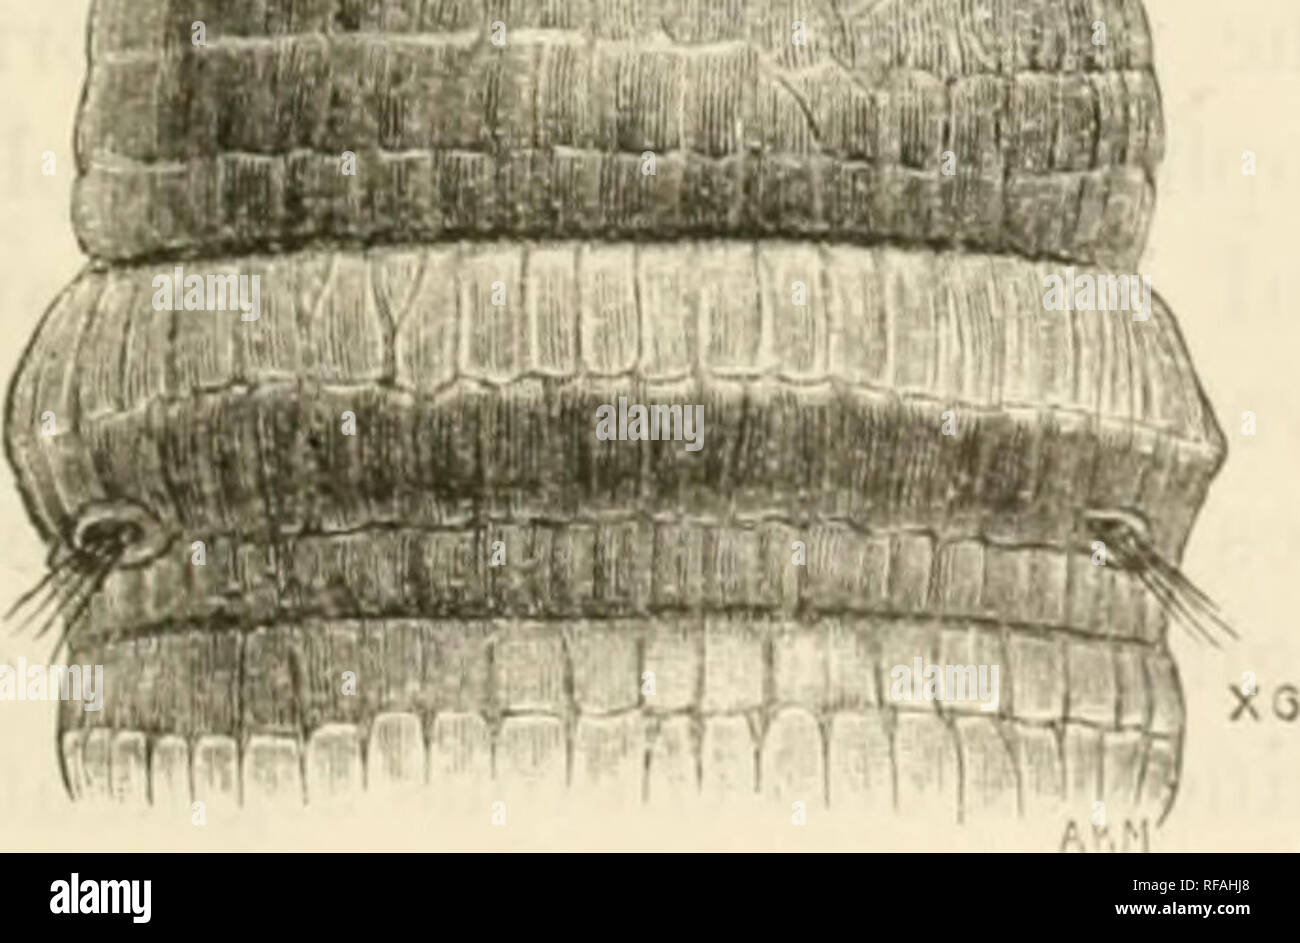 . Catalogue of the Chaetopoda in the British Museum (Natural History). Oligochaeta; Polychaeta. i'iii. 56.—A. assimiliji var. affinia, from Otago Harbour, N.Z. Anterior end, dorsal aspect; the buccal mass and pharjTix are fully pro- truded, and the prostomiuni is well extended St.O. External aperture of statocyst.. Fig. 57.—A. assimilis! var. affinis, from the Falkland Islands. Anterior end, dorsal aspect; showing prostomium very fully ex- tended, exposing to view the median pos- terior part (P.), which is usually hidden in the nuchal organ ; M. Median ; L. Lateral lobe of prostomium ; ST.O. E Stock Photo